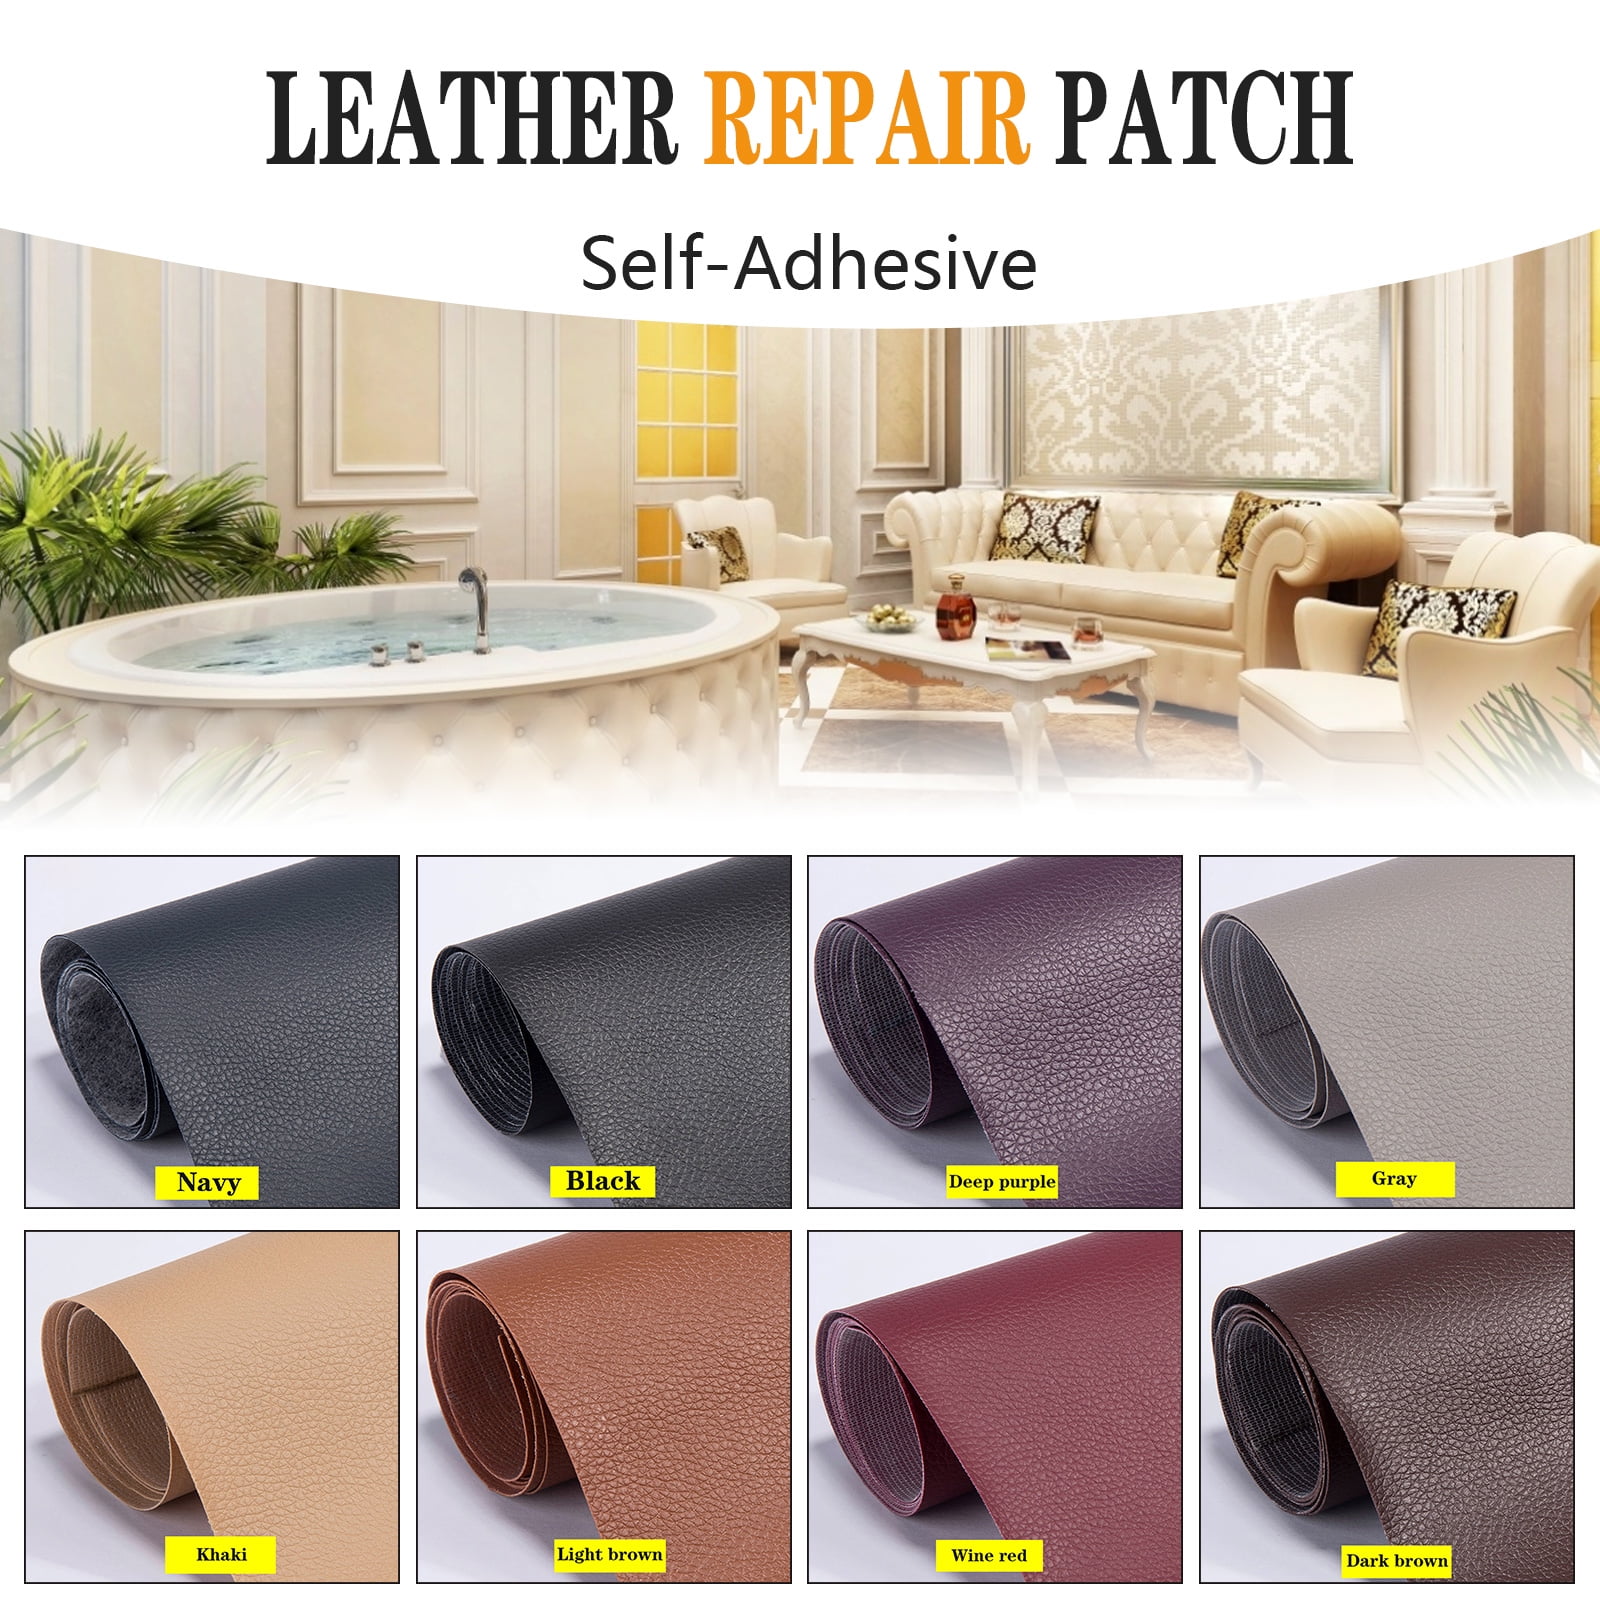 Printed Leather Repair Patch,Repair Patch Self Adhesive Waterproof, DIY  Large Leather Patches for Couches, Furniture, Kitchen Cabinets, Wall  (Flower